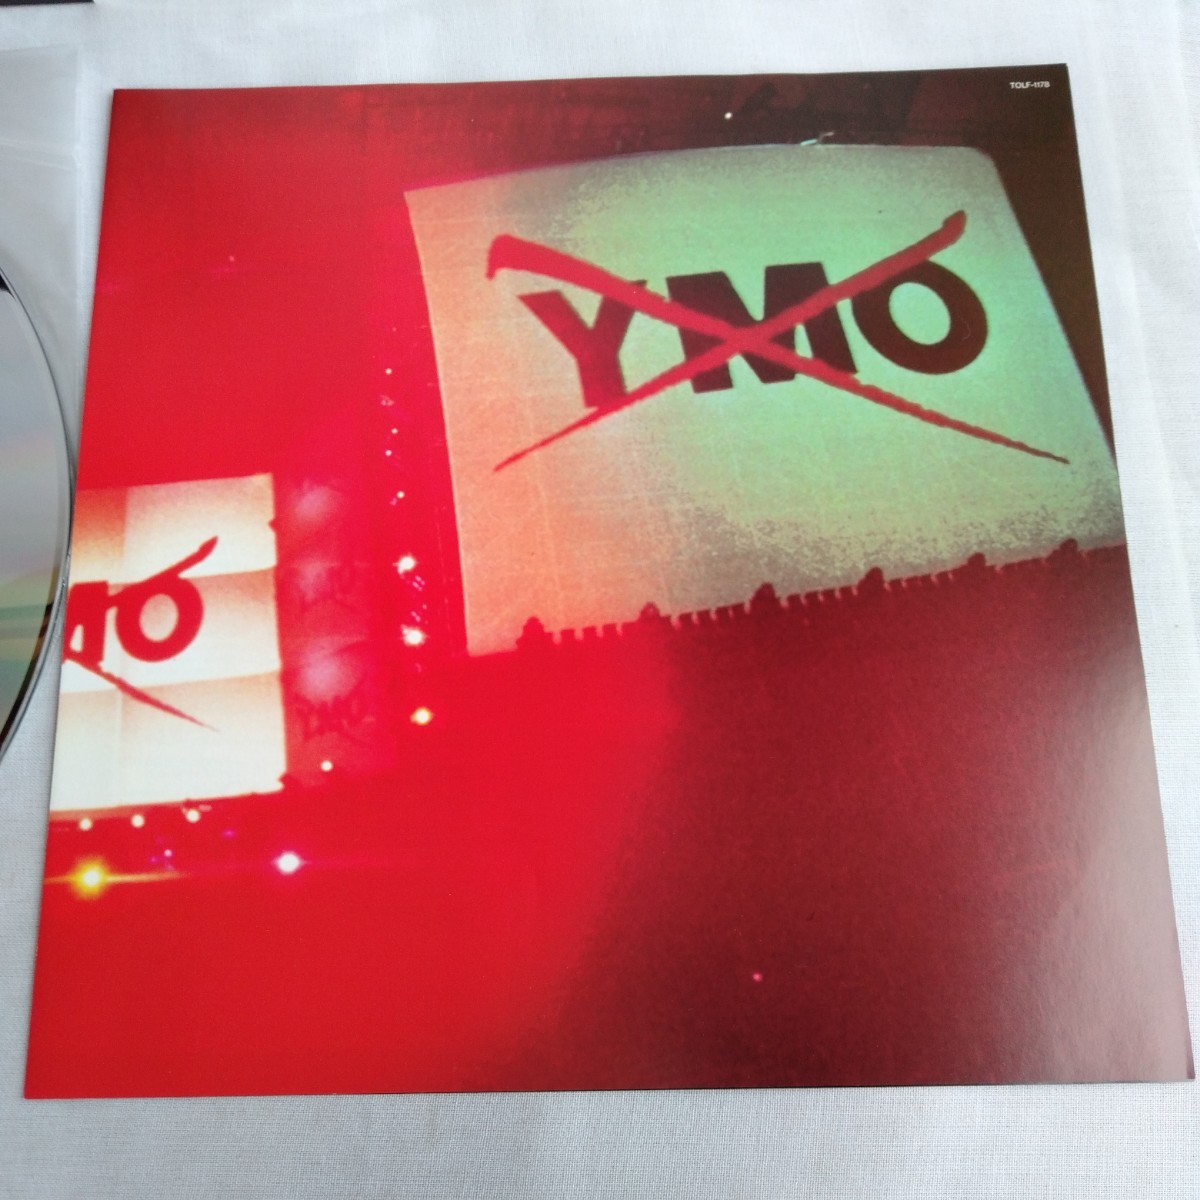 ya640 YMO 1993 year TECHNODON IN TOKYO DOME laser disk LD what sheets also uniform carriage 1,000 jpy reproduction not yet verification 